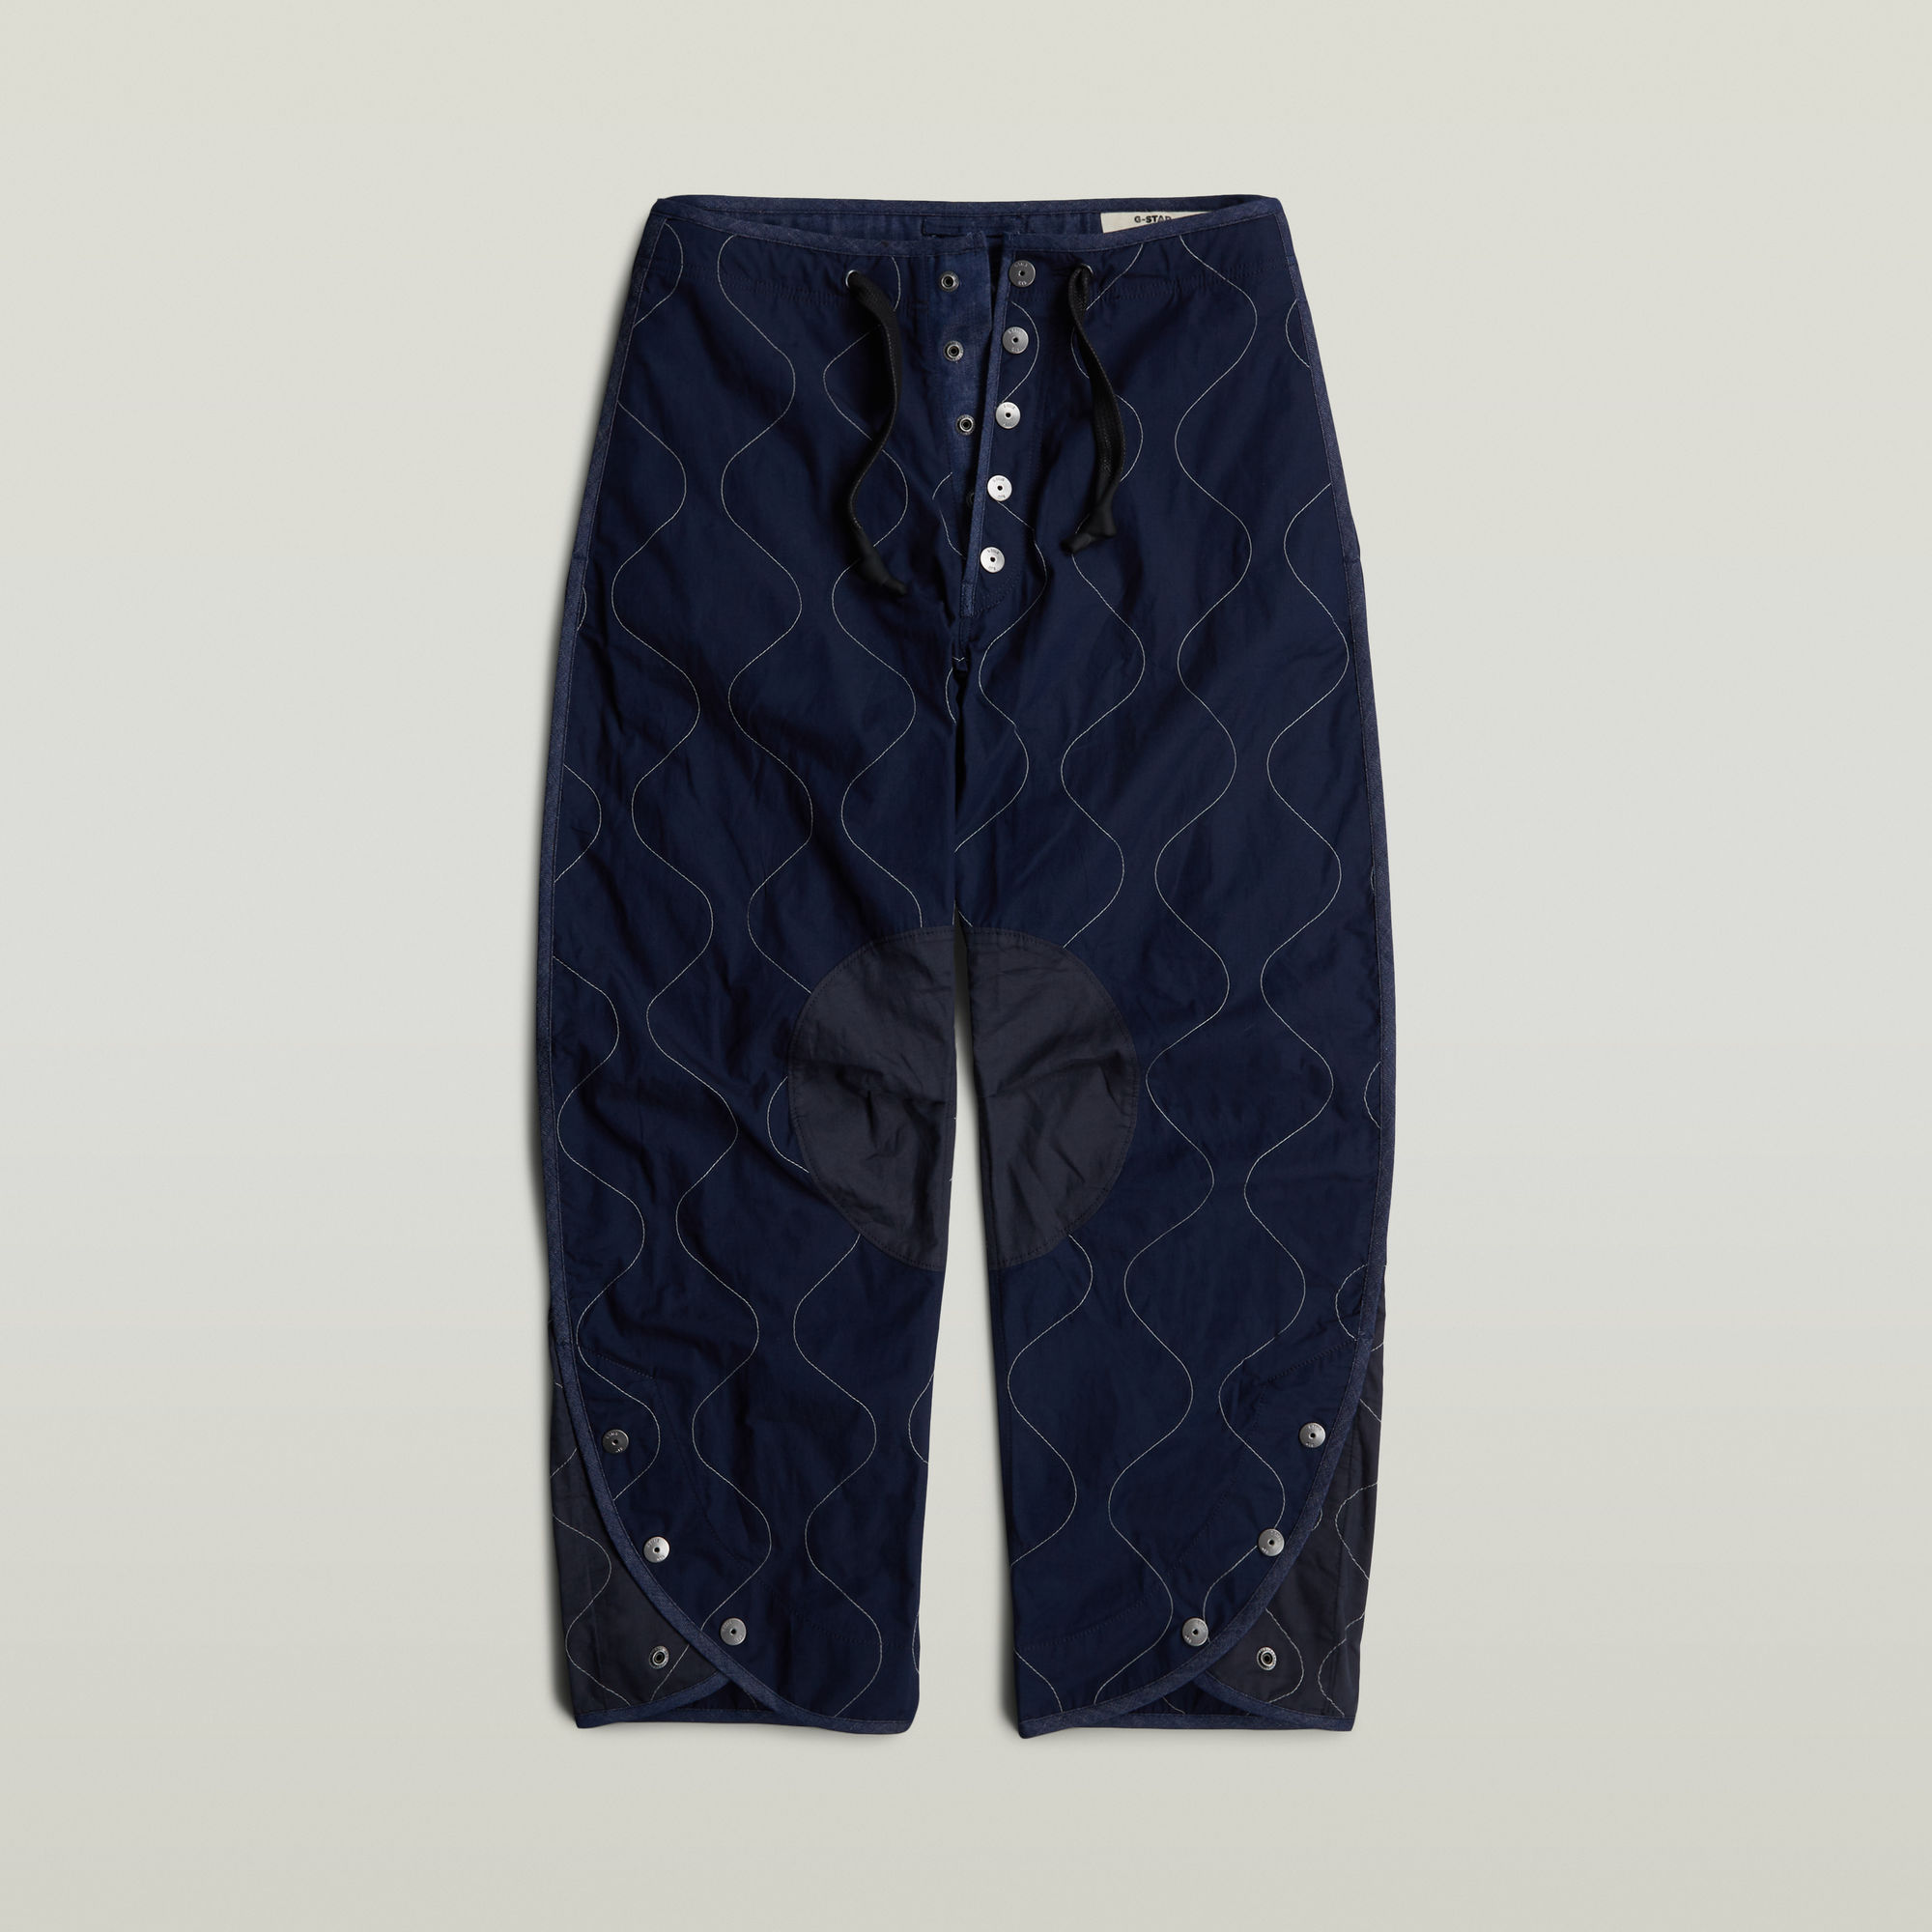 G-Star RAW GSRR Relaxed Curved Broek Donkerblauw Heren